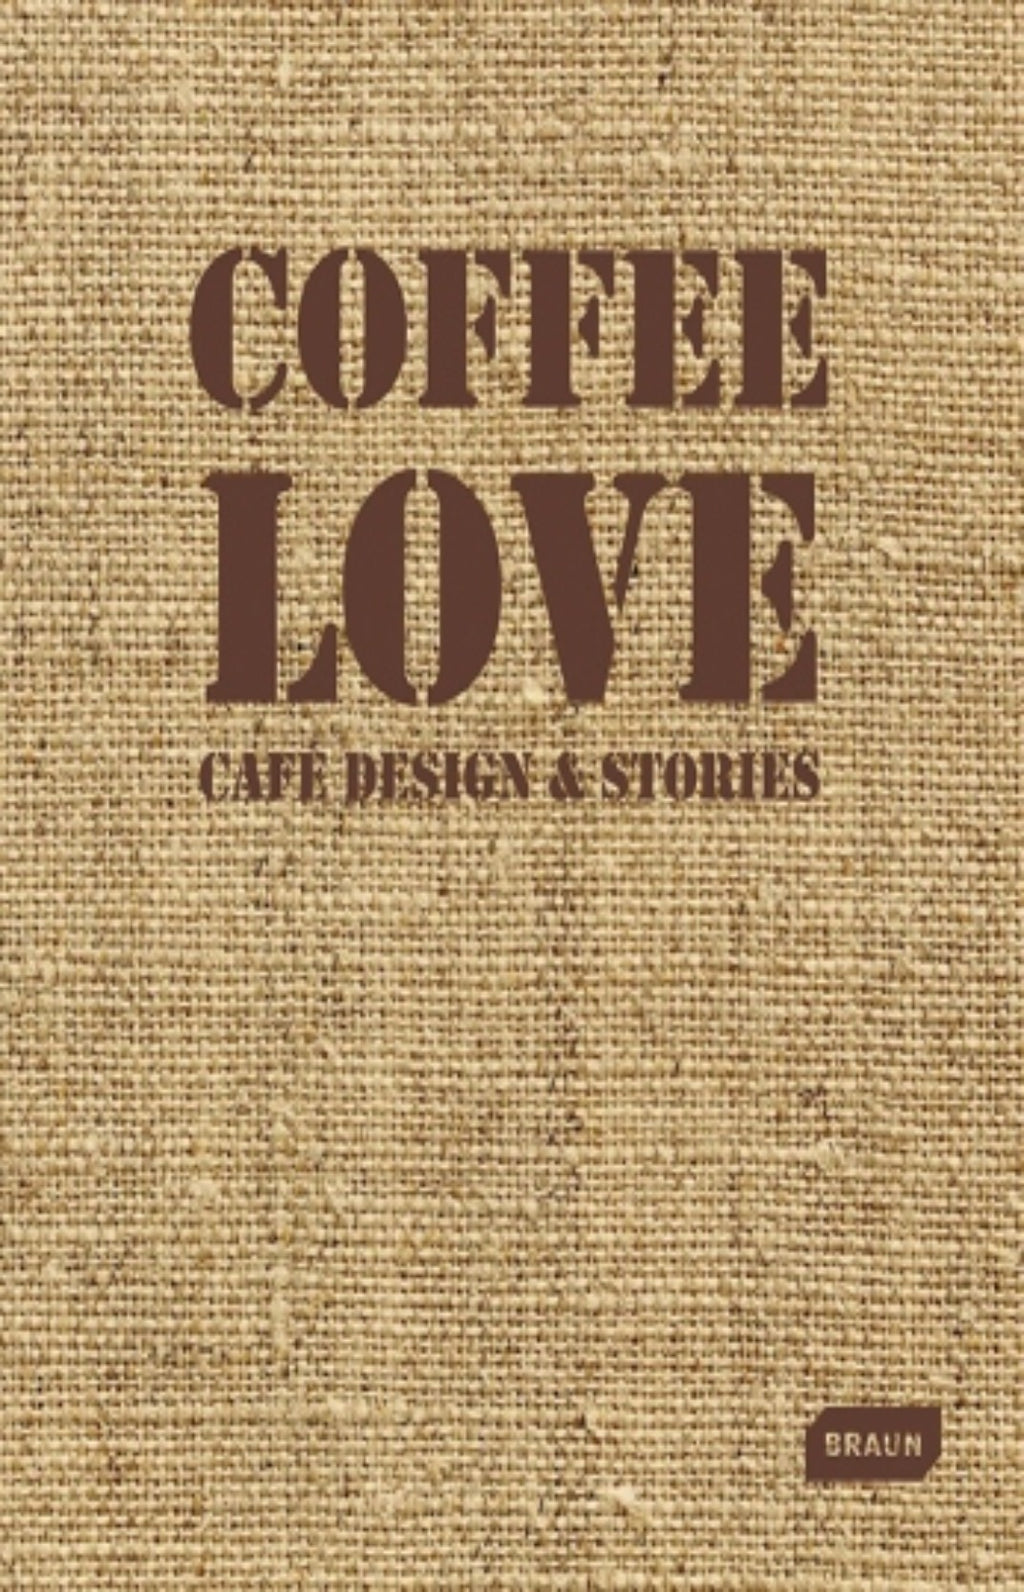 Coffee Love : Cafe Design & Stories